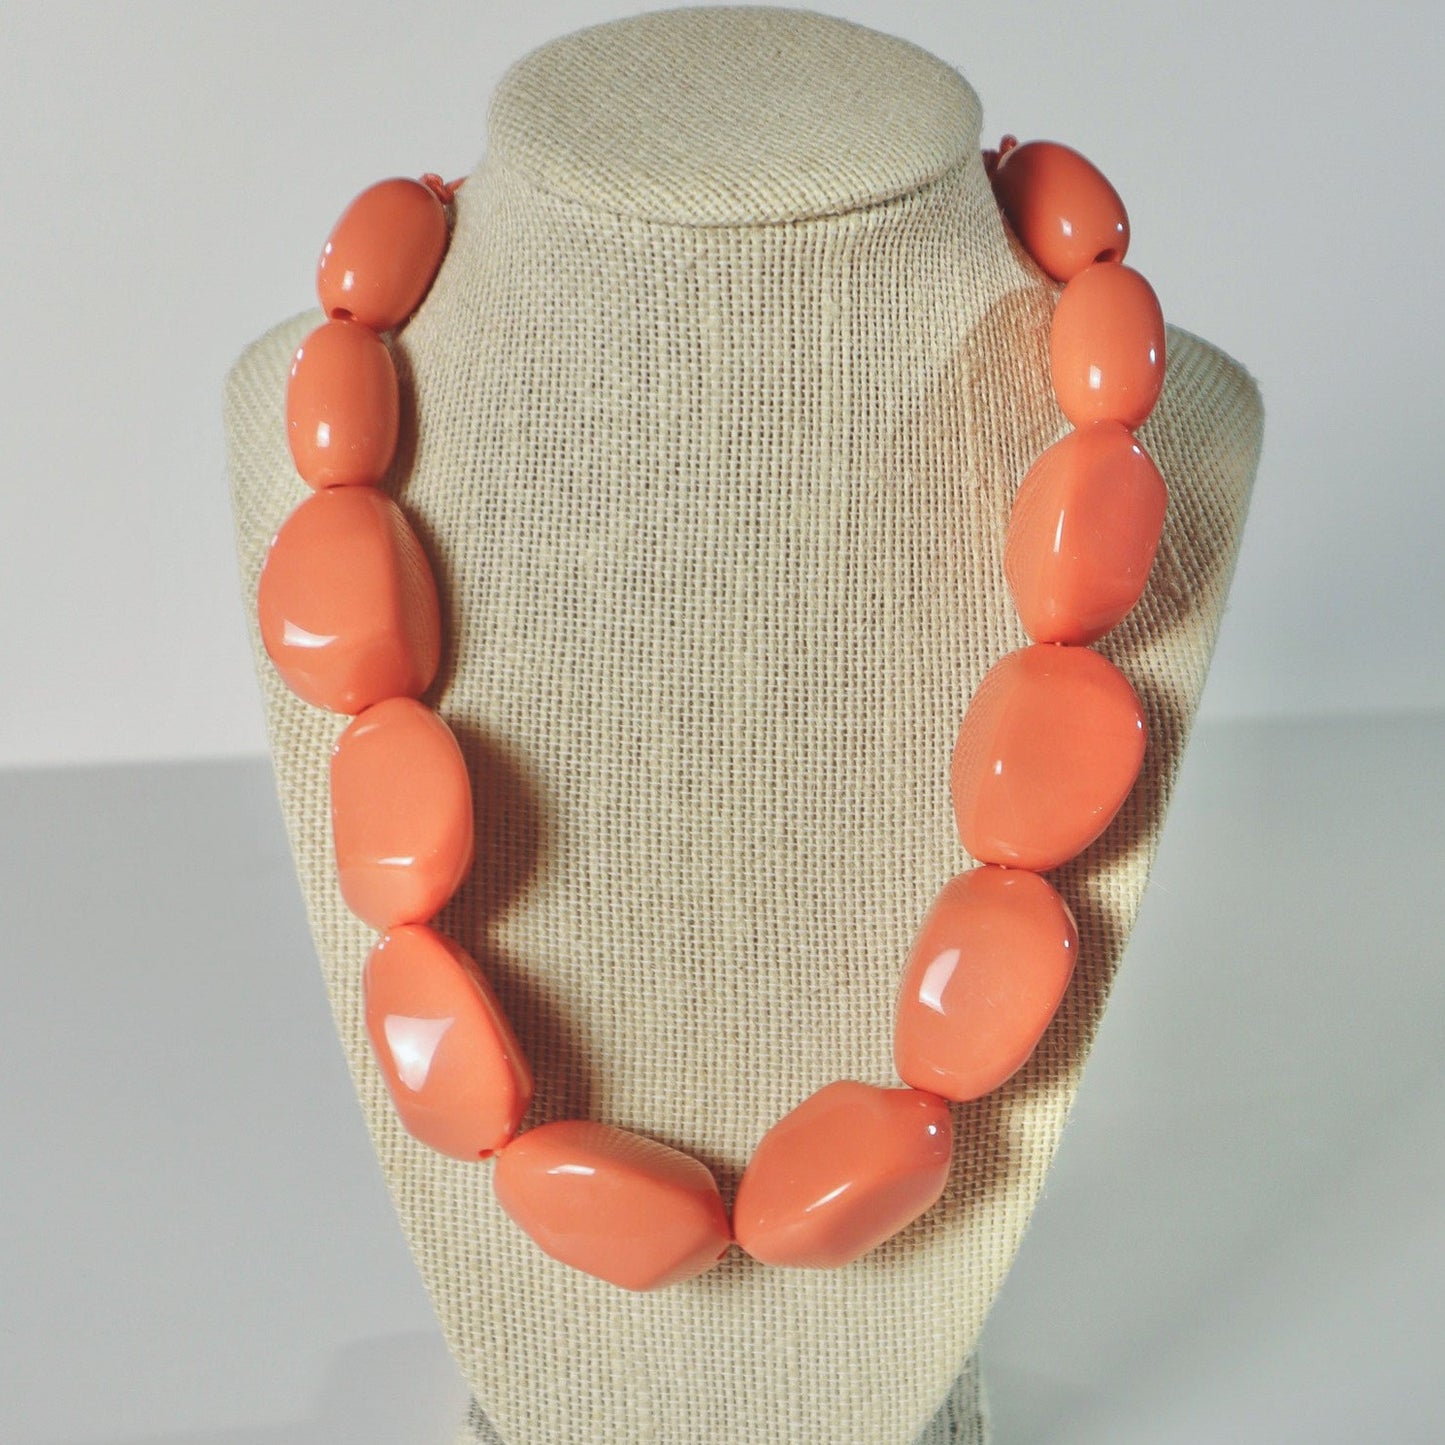 Chunky Geometric Statement Resin Necklace in Peach